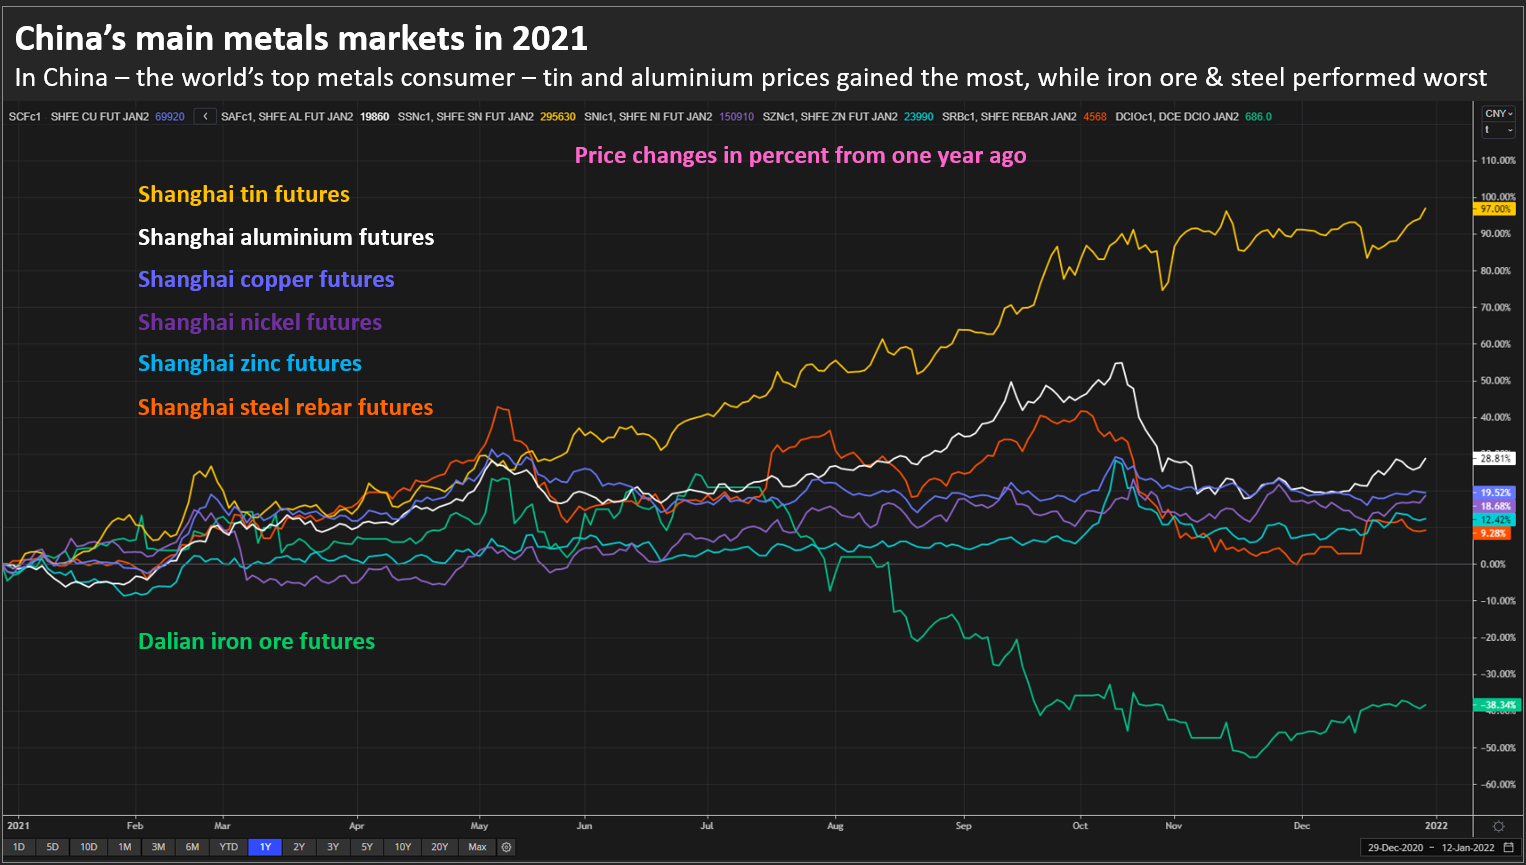 The main metals markets in China in 2021